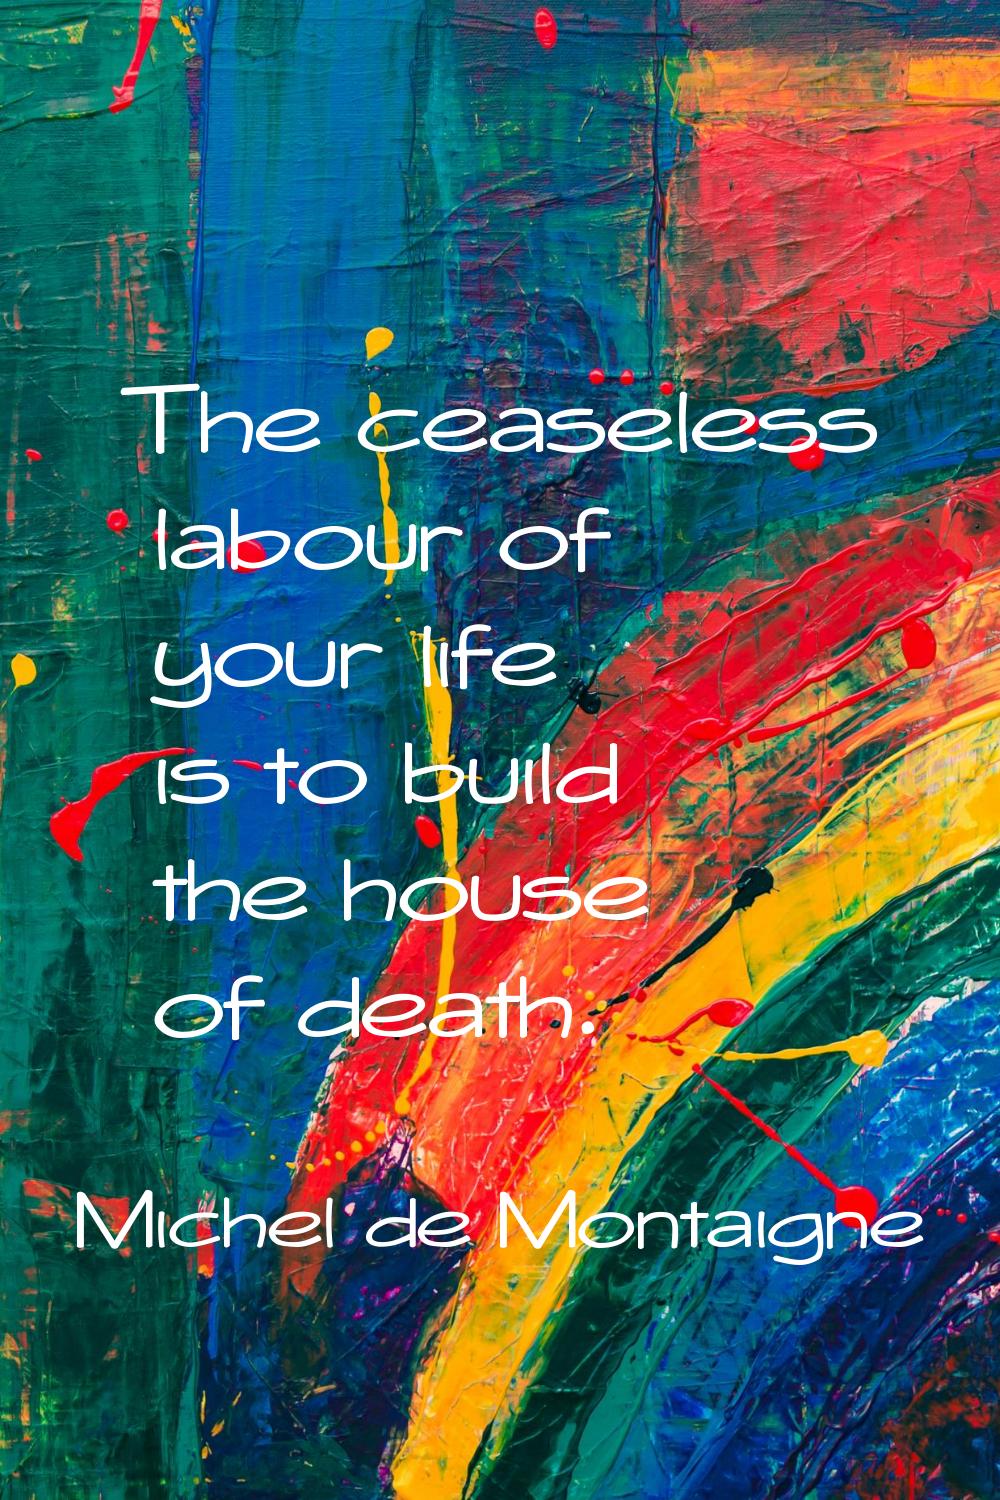 The ceaseless labour of your life is to build the house of death.